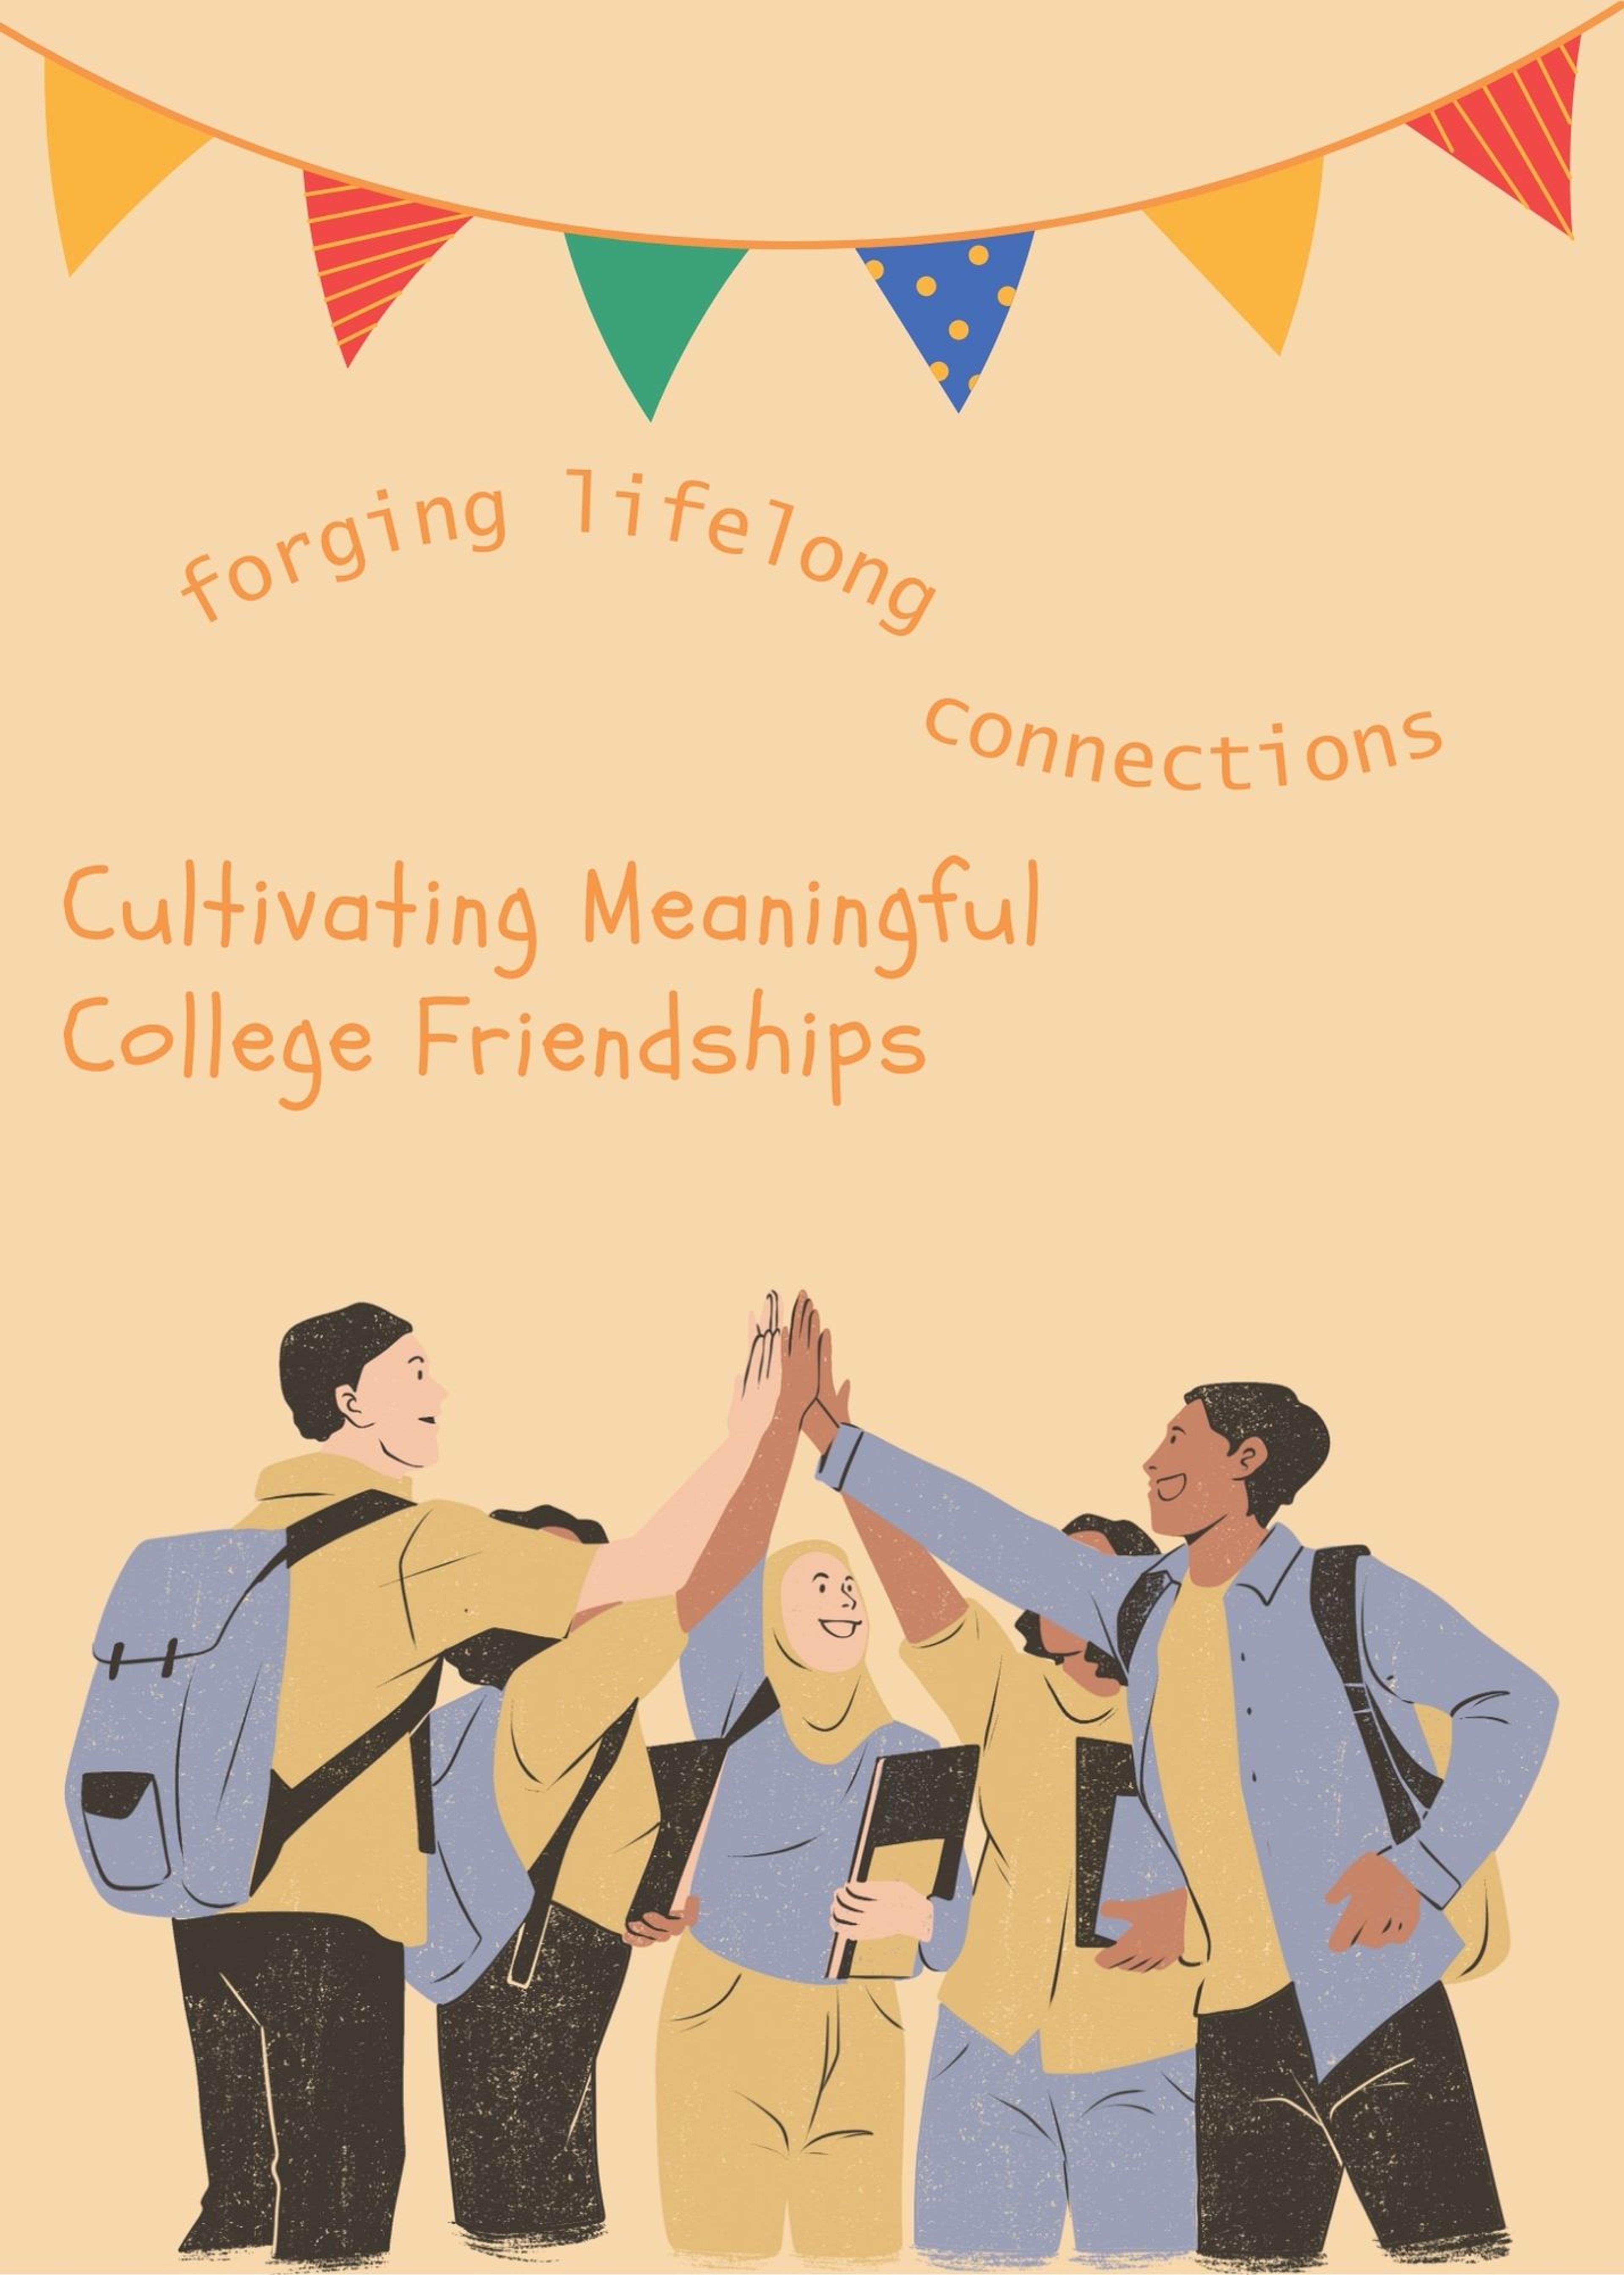 Forging lifelong connections: cultivating meaningful college friendships